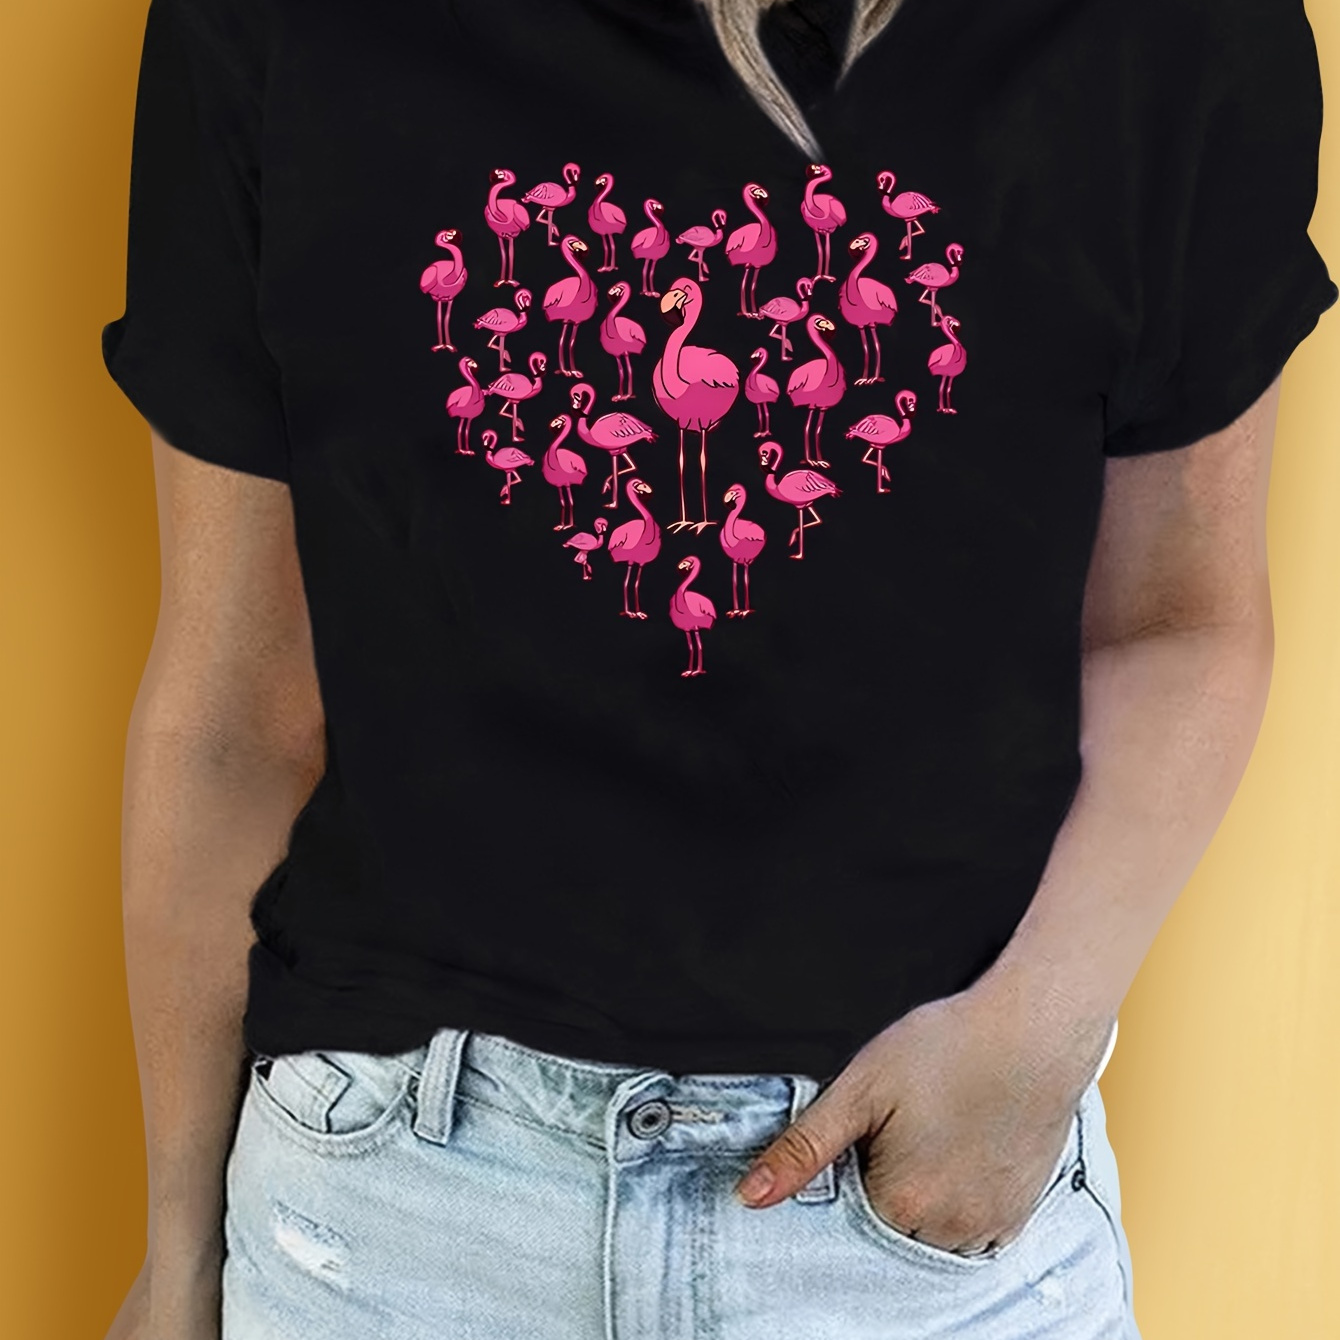 

Heart & Flamingo Print T-shirt, Short Sleeve Crew Neck Casual Top For Summer & Spring, Women's Clothing